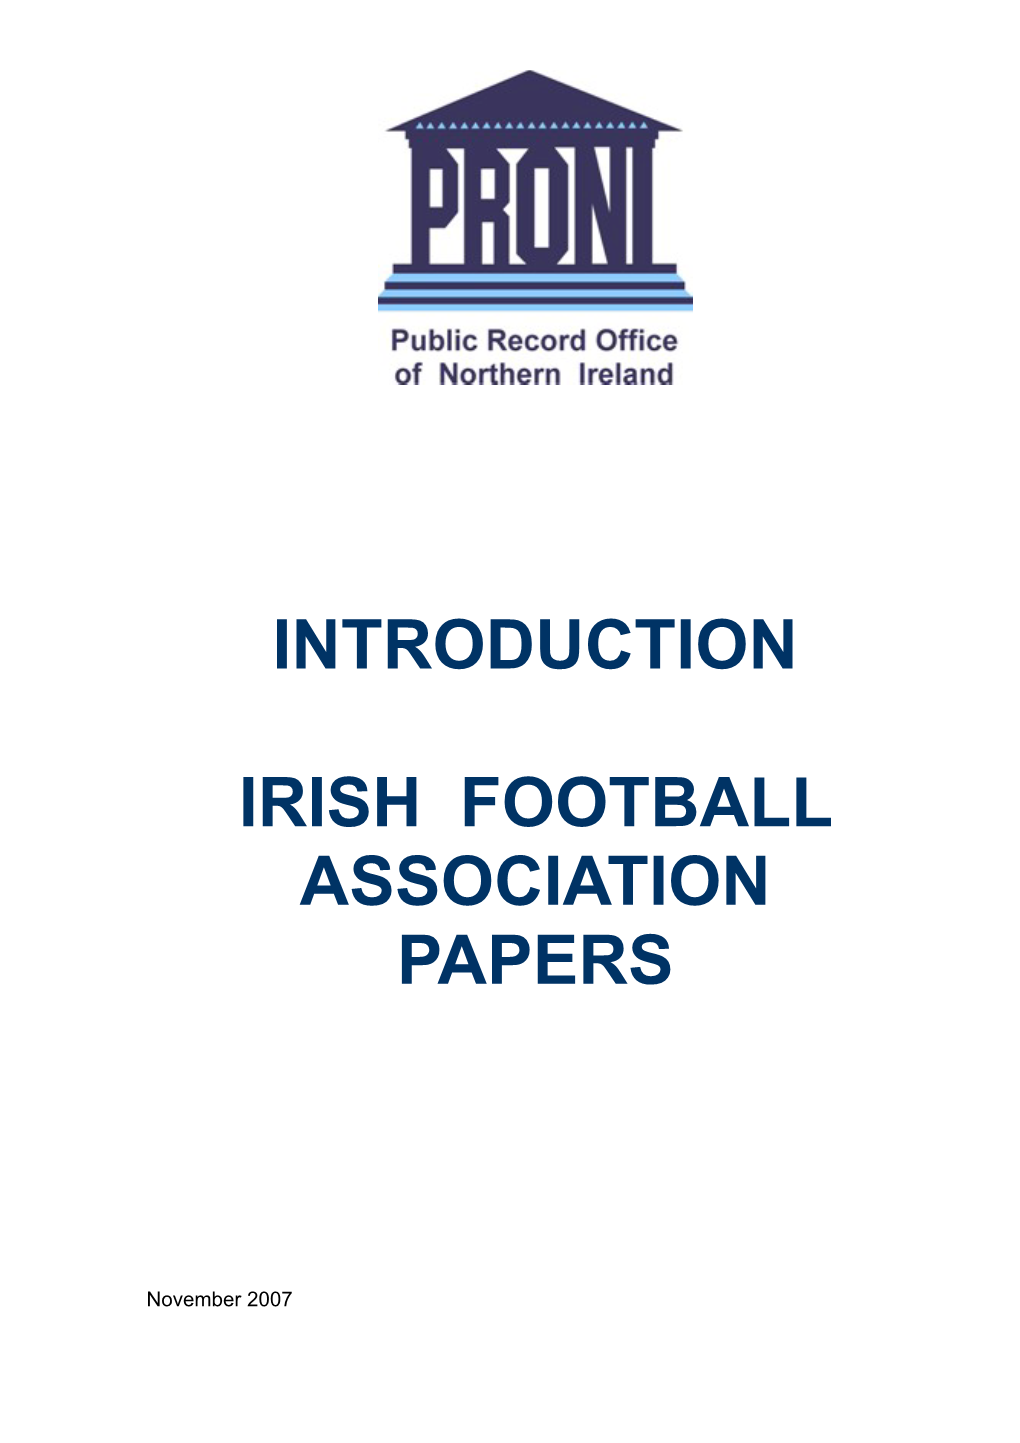 Introduction to the Irish Football Association Papers